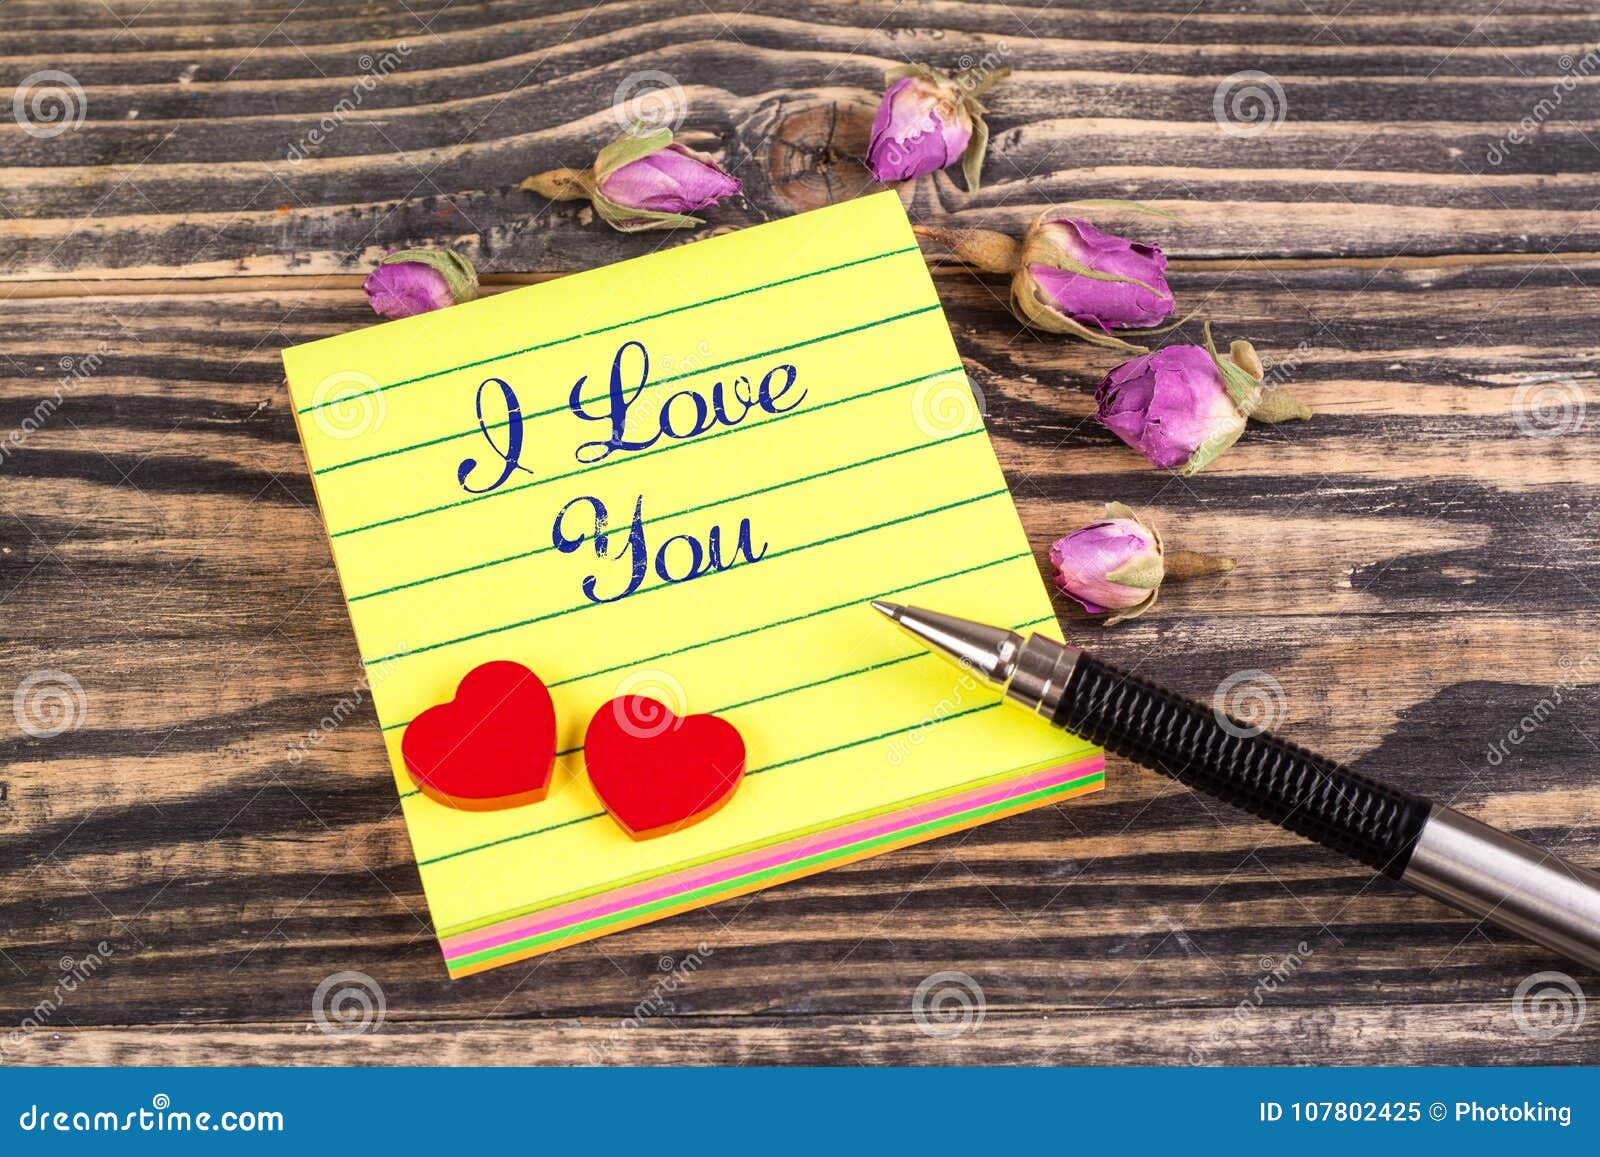 L love you in sticky note stock image. Image of hearts - 107802425